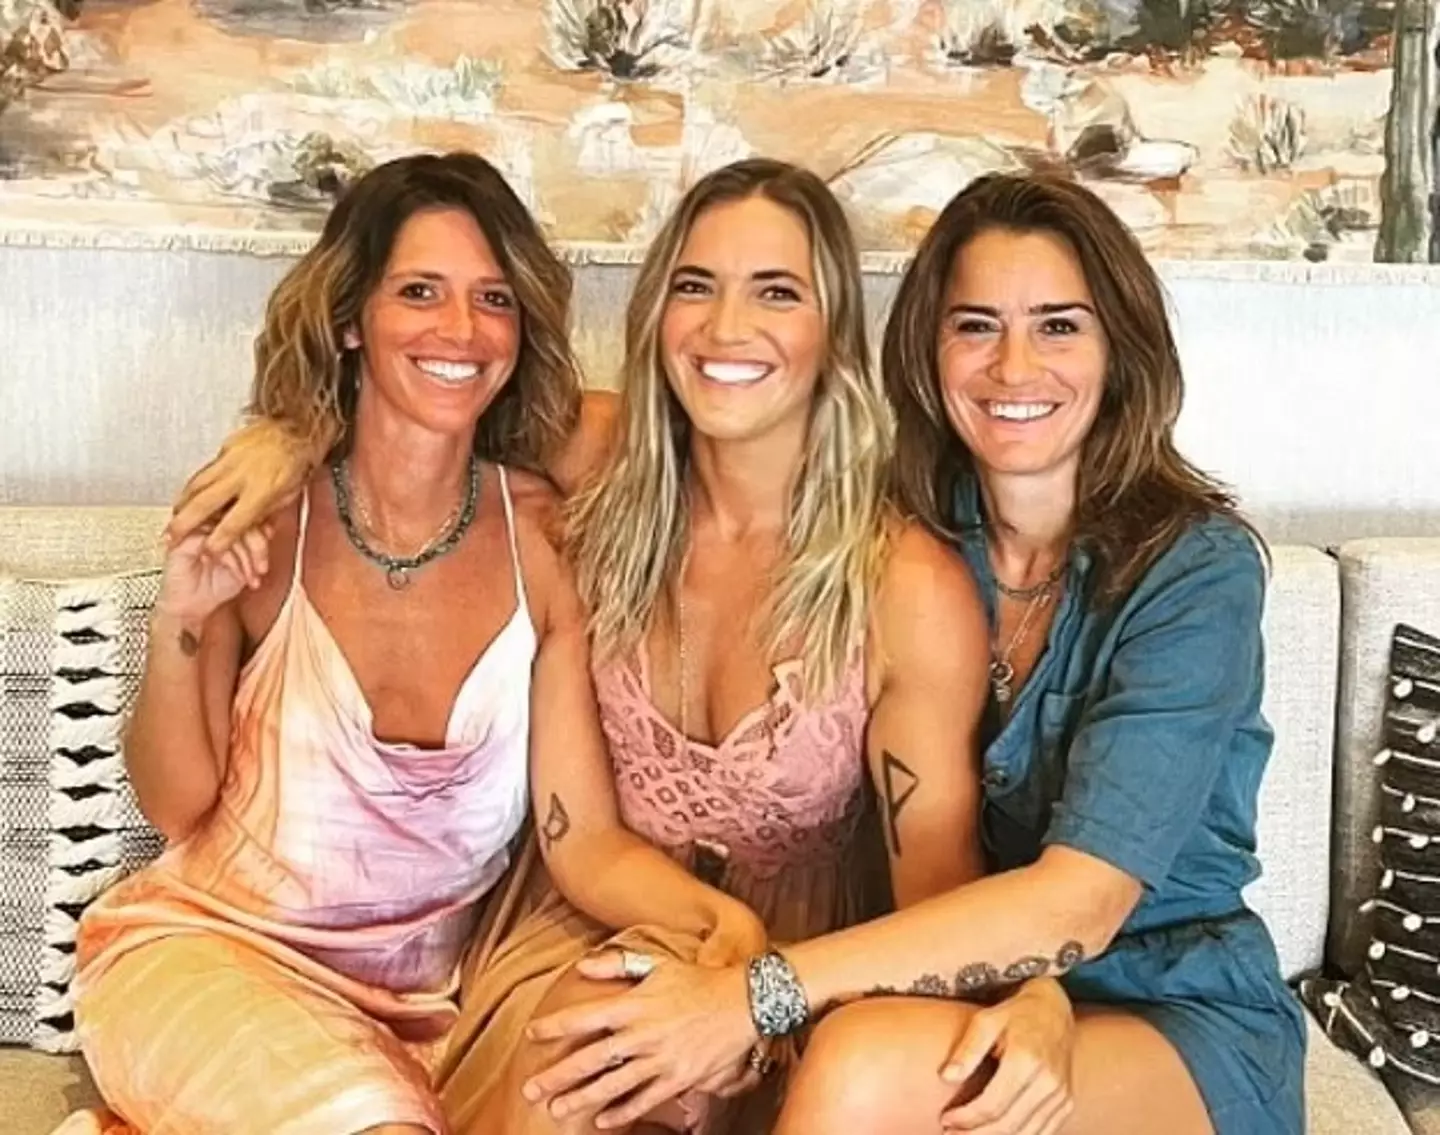 Dr Nicole (right) with her wife Lolly (left) and their partner Jenna (centre).